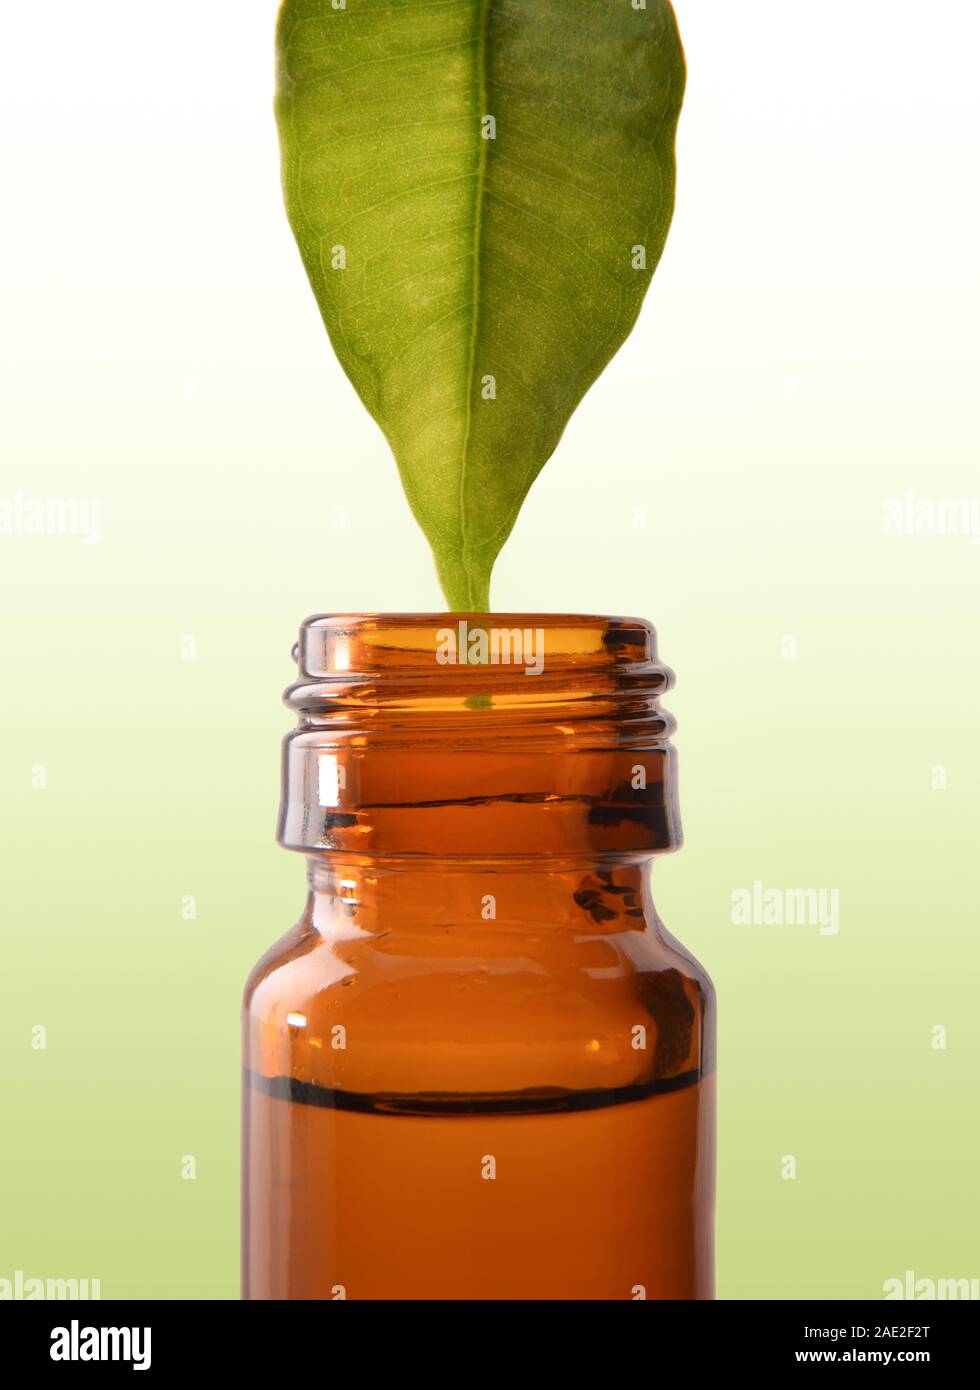 Natural medicine concept leaf and jar with medicinal liquid and green gradient background. Horizontal composition. Front view. Stock Photo